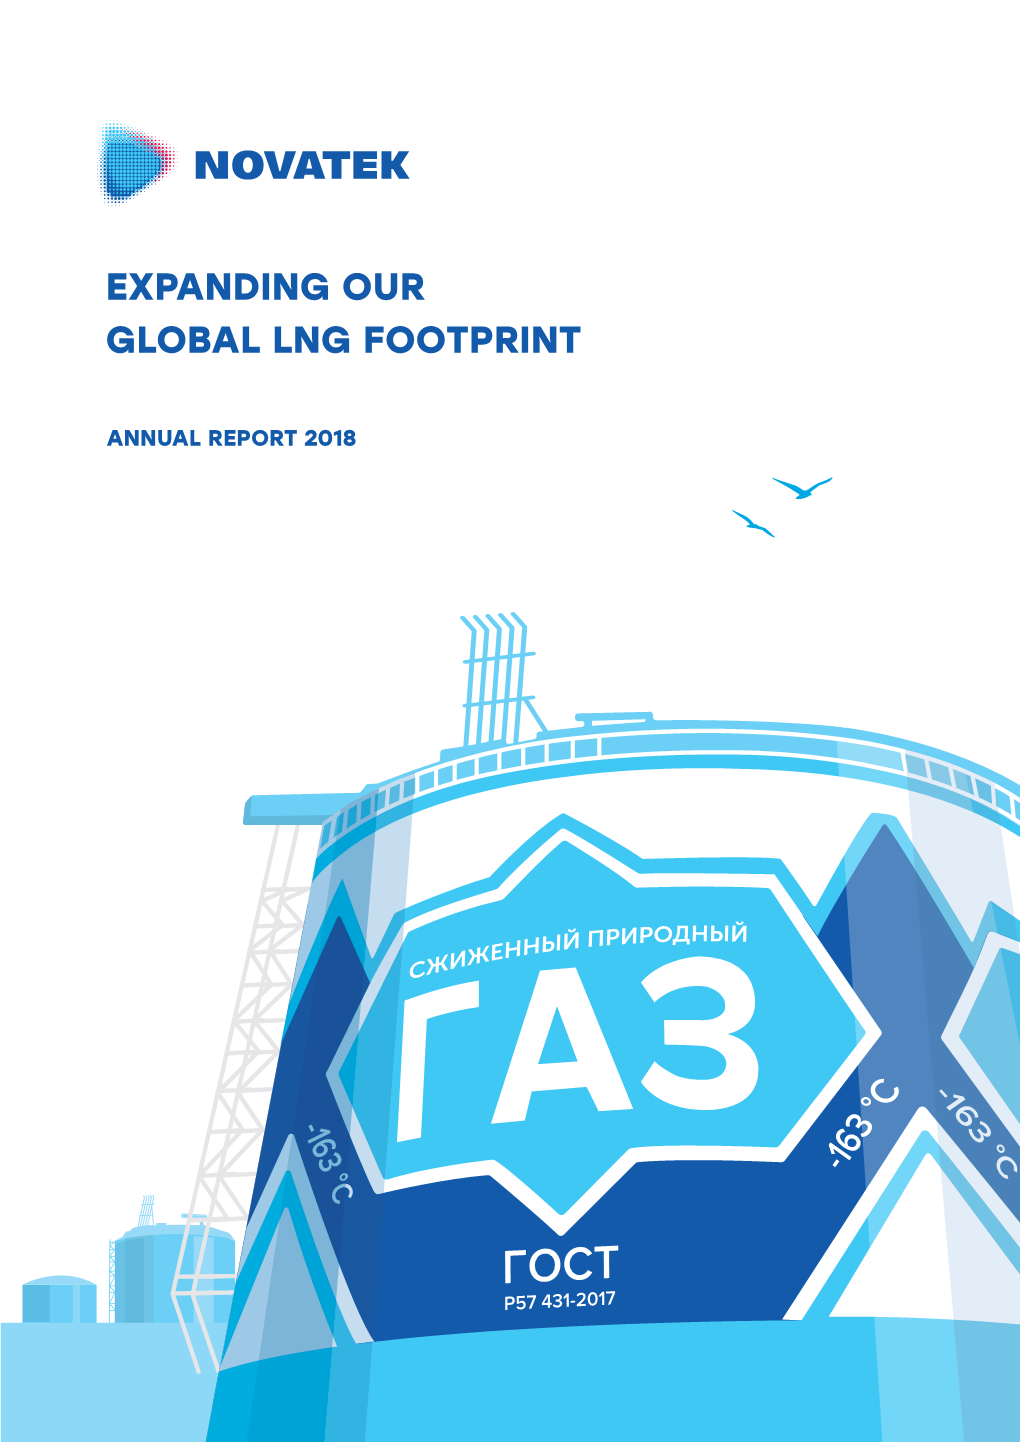 EXPANDING OUR GLOBAL LNG FOOTPRINT GLOBAL LNGFOOTPRINT EXPANDING OUR ANNUAL REPORT 2018 NOVATEK at a Glance 2018